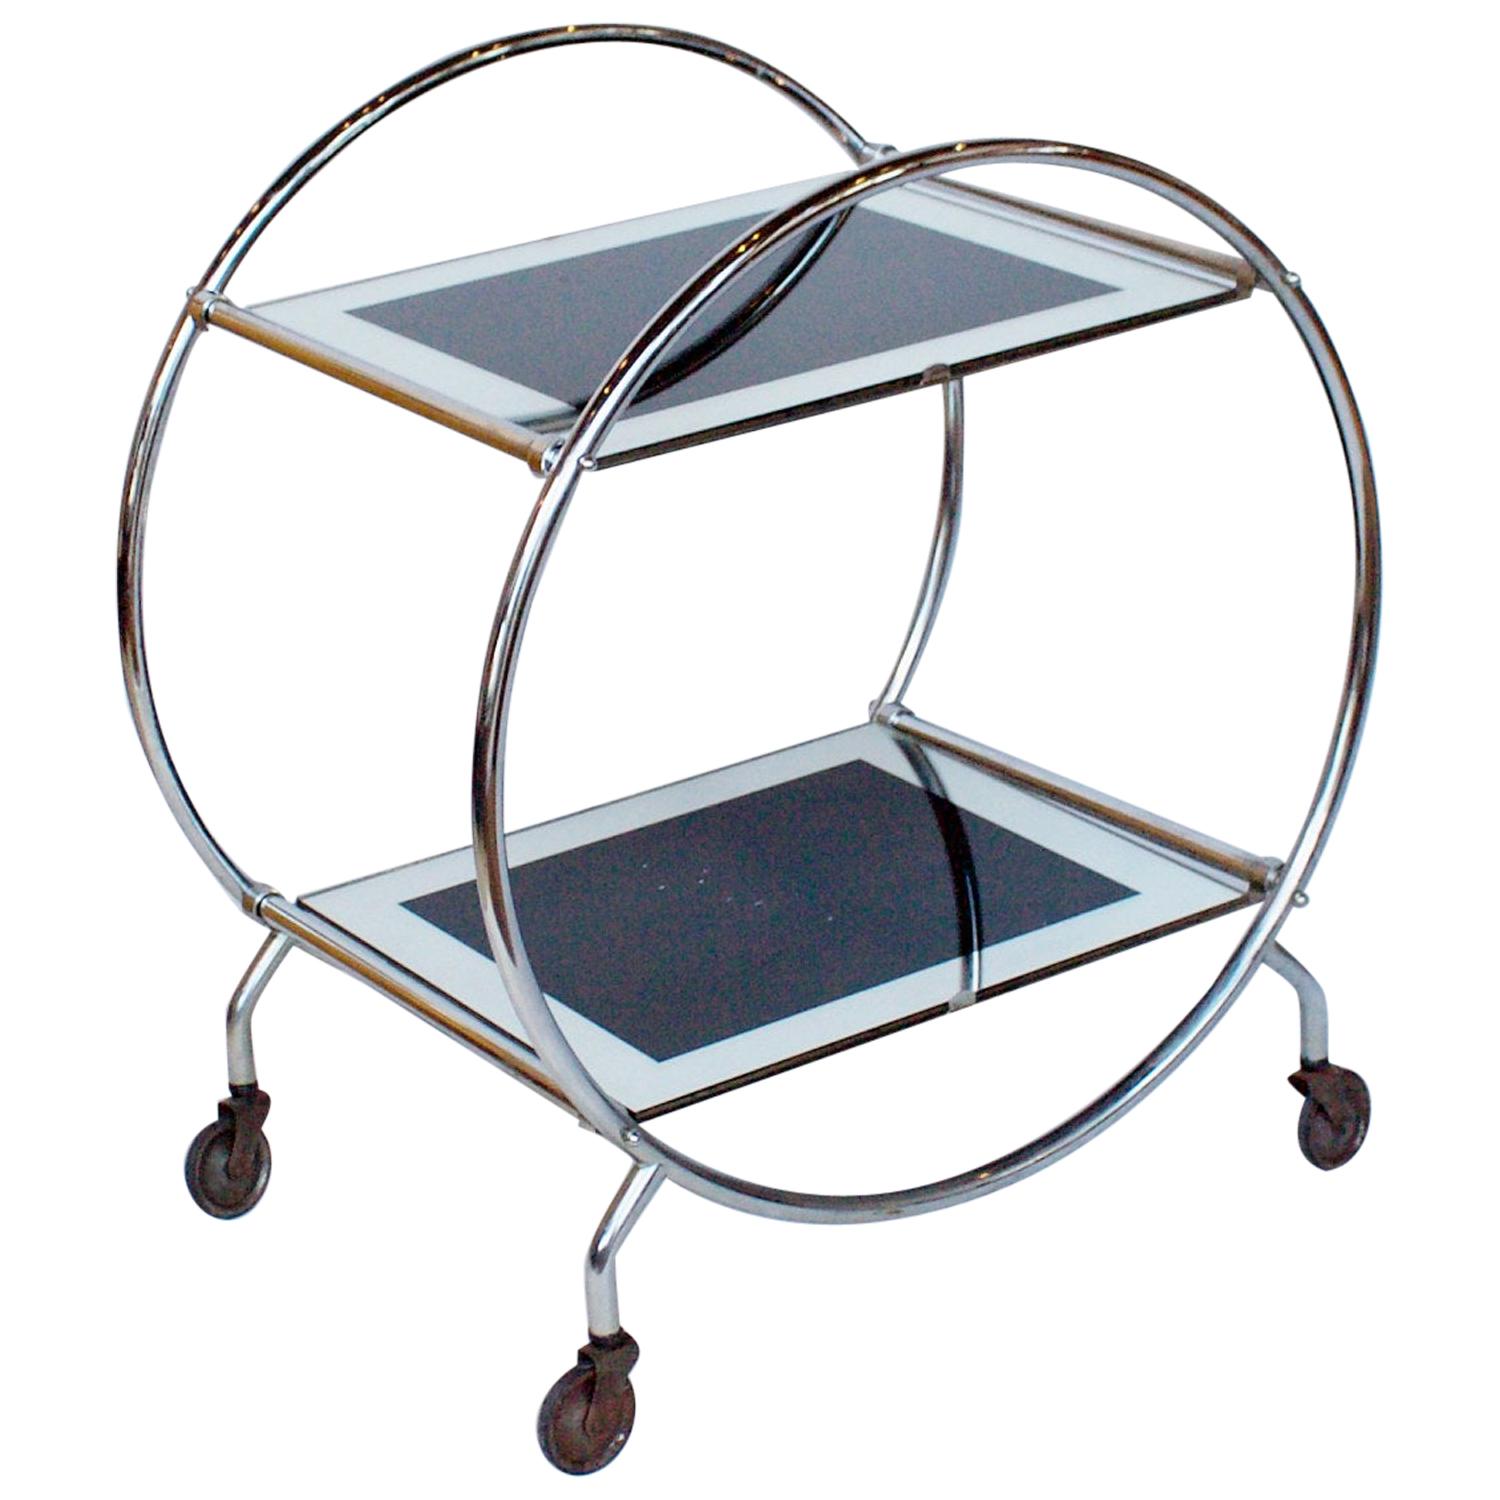 Art Deco Chrome and Mirrored Glass Drinks Trolley